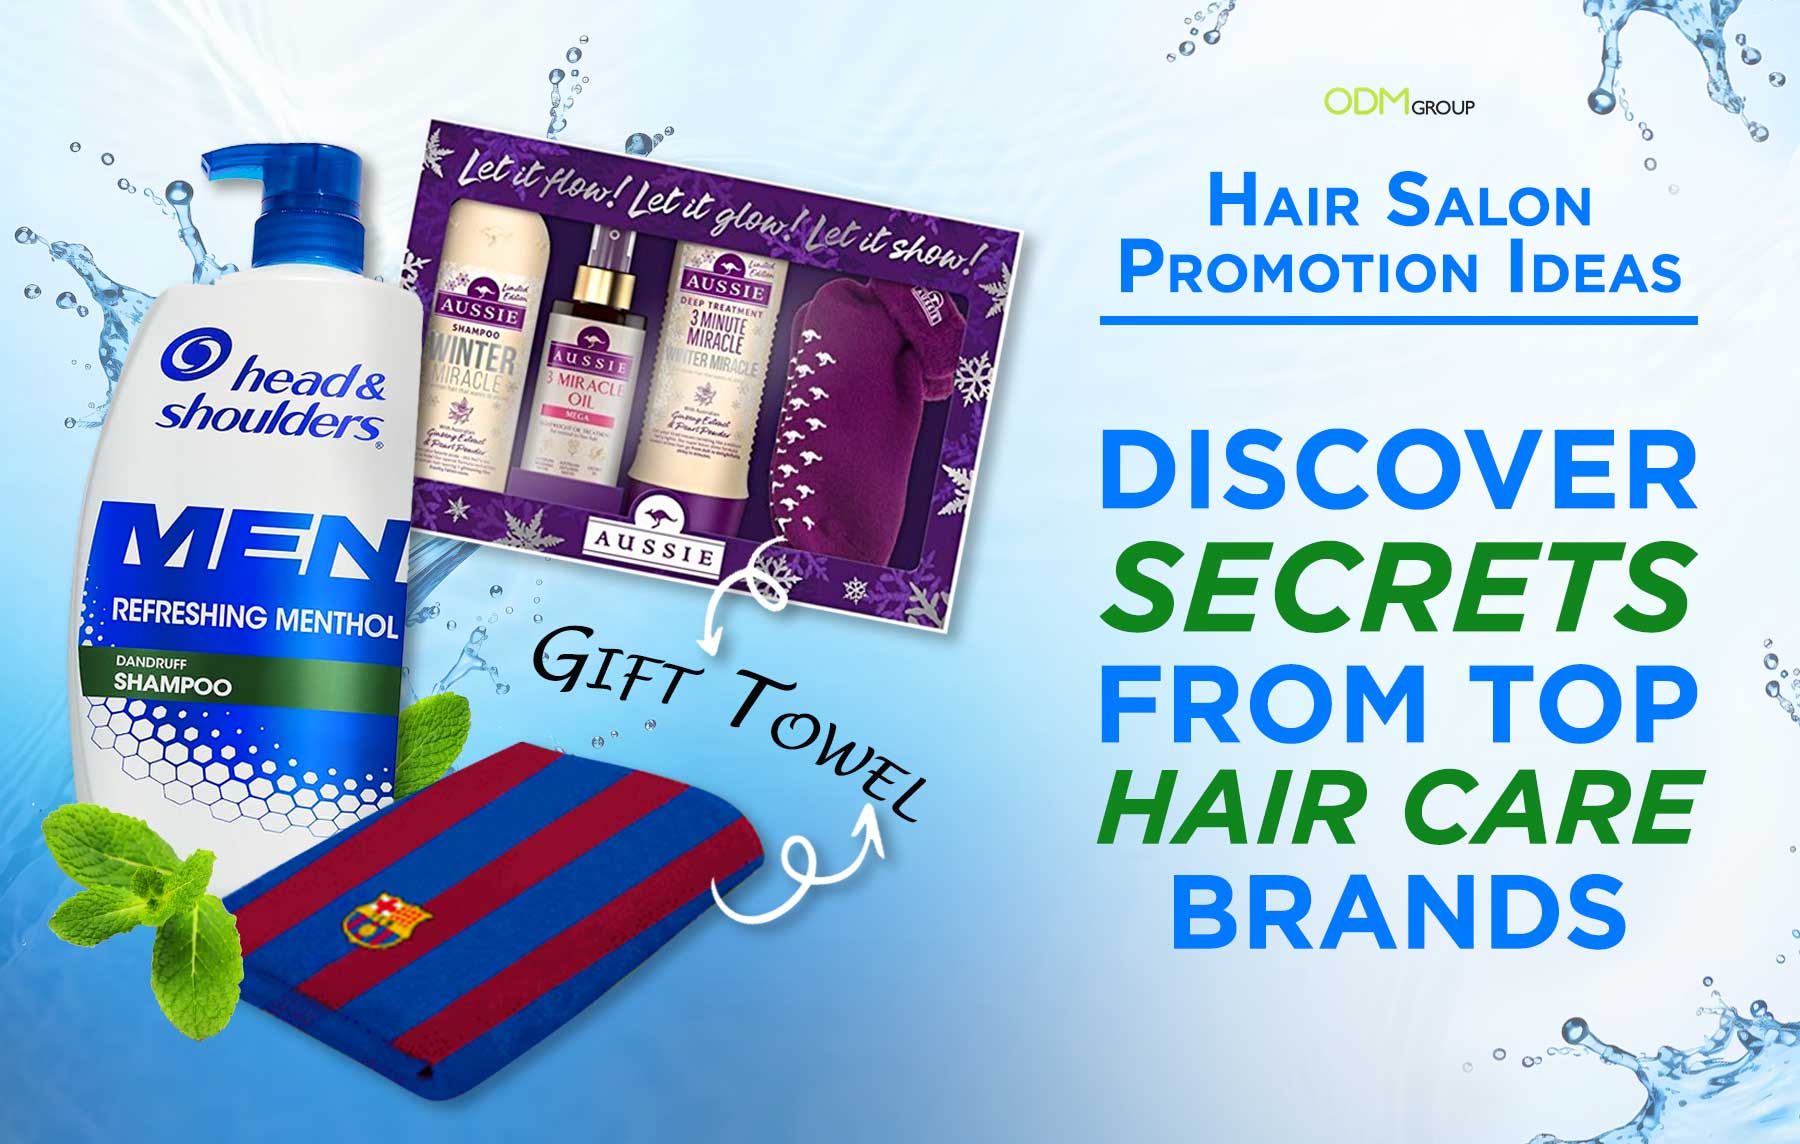 Haircare product sample promotions and deals